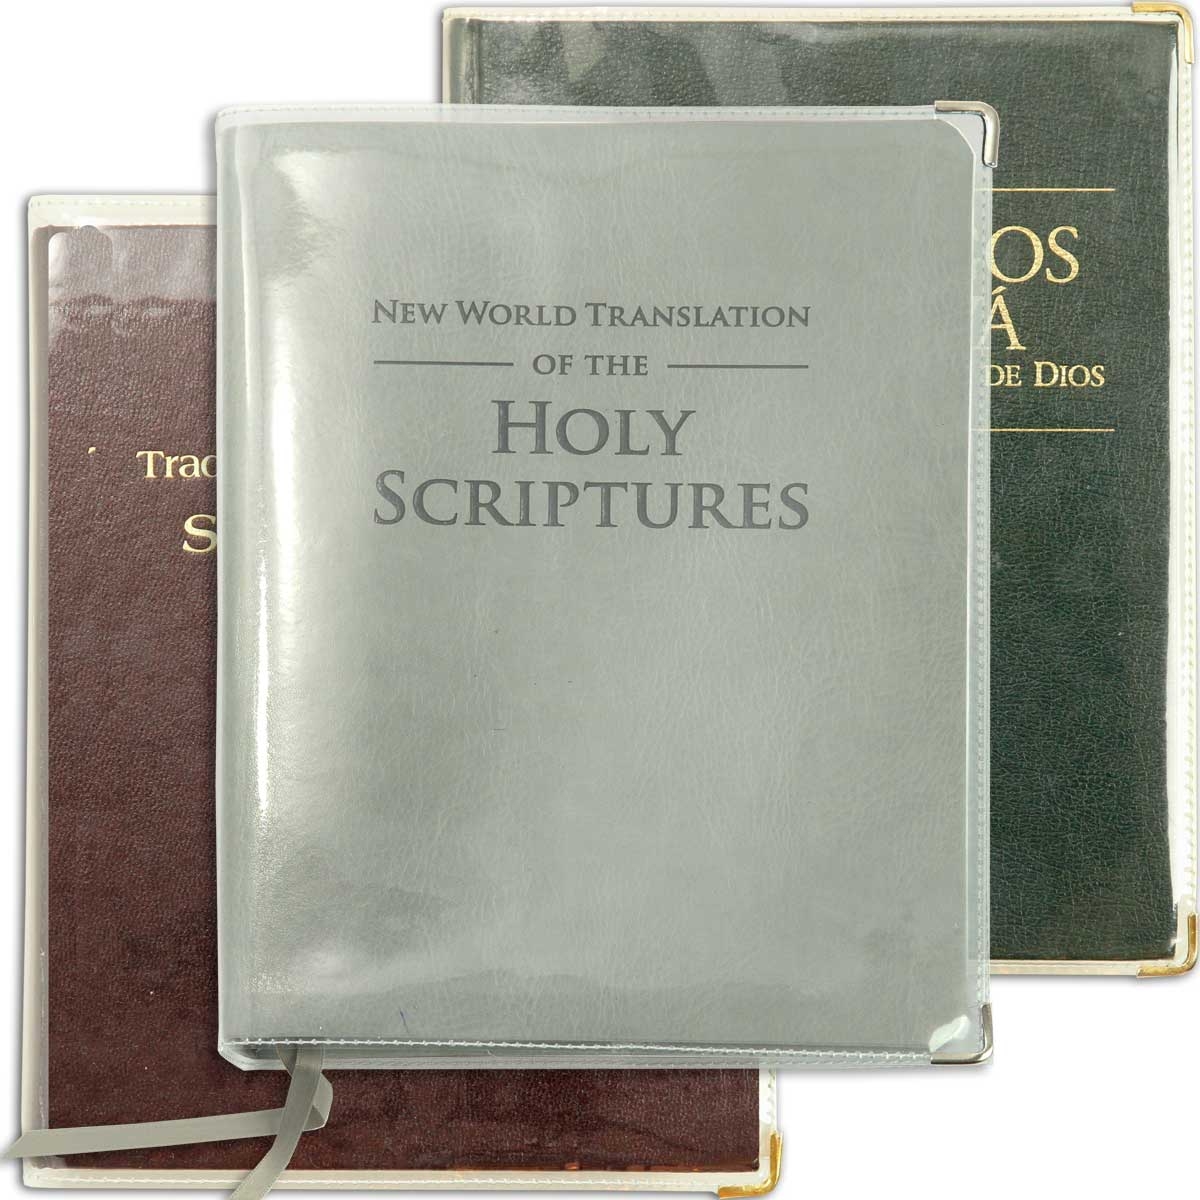 Clear Vinyl NWT Bible Cover | Large Print NWT Bible Cover